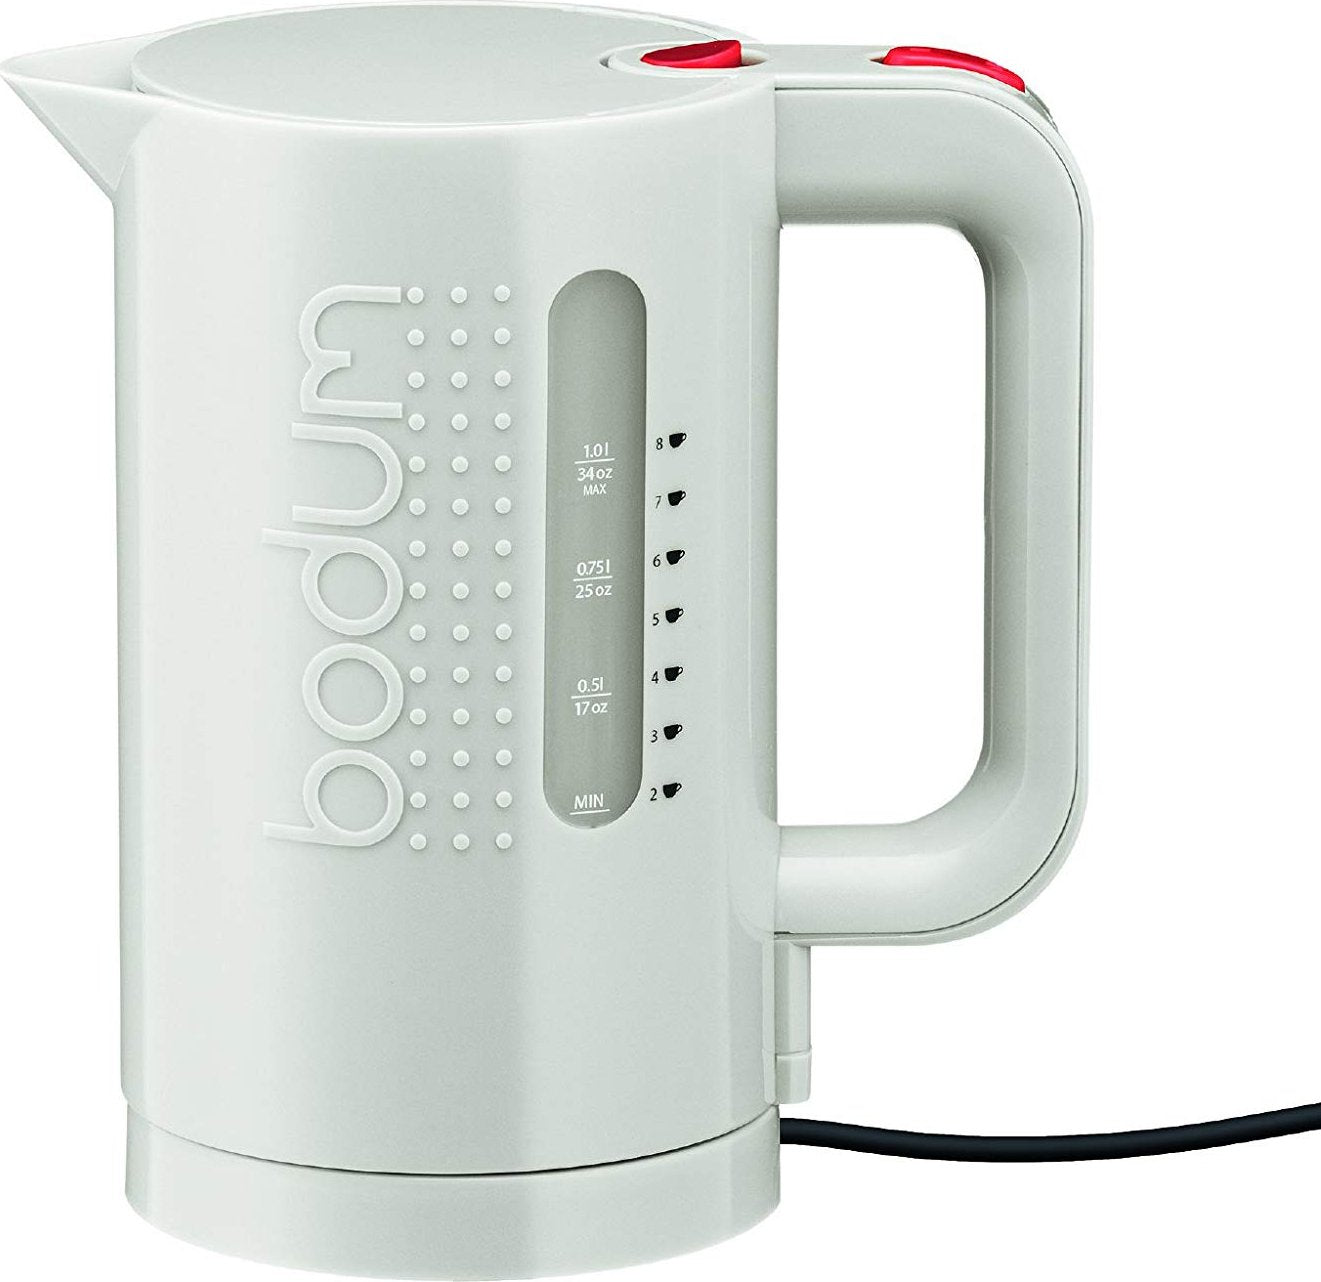 Bodum - Electric Water Kettle 34 oz Off White - 11452-913US